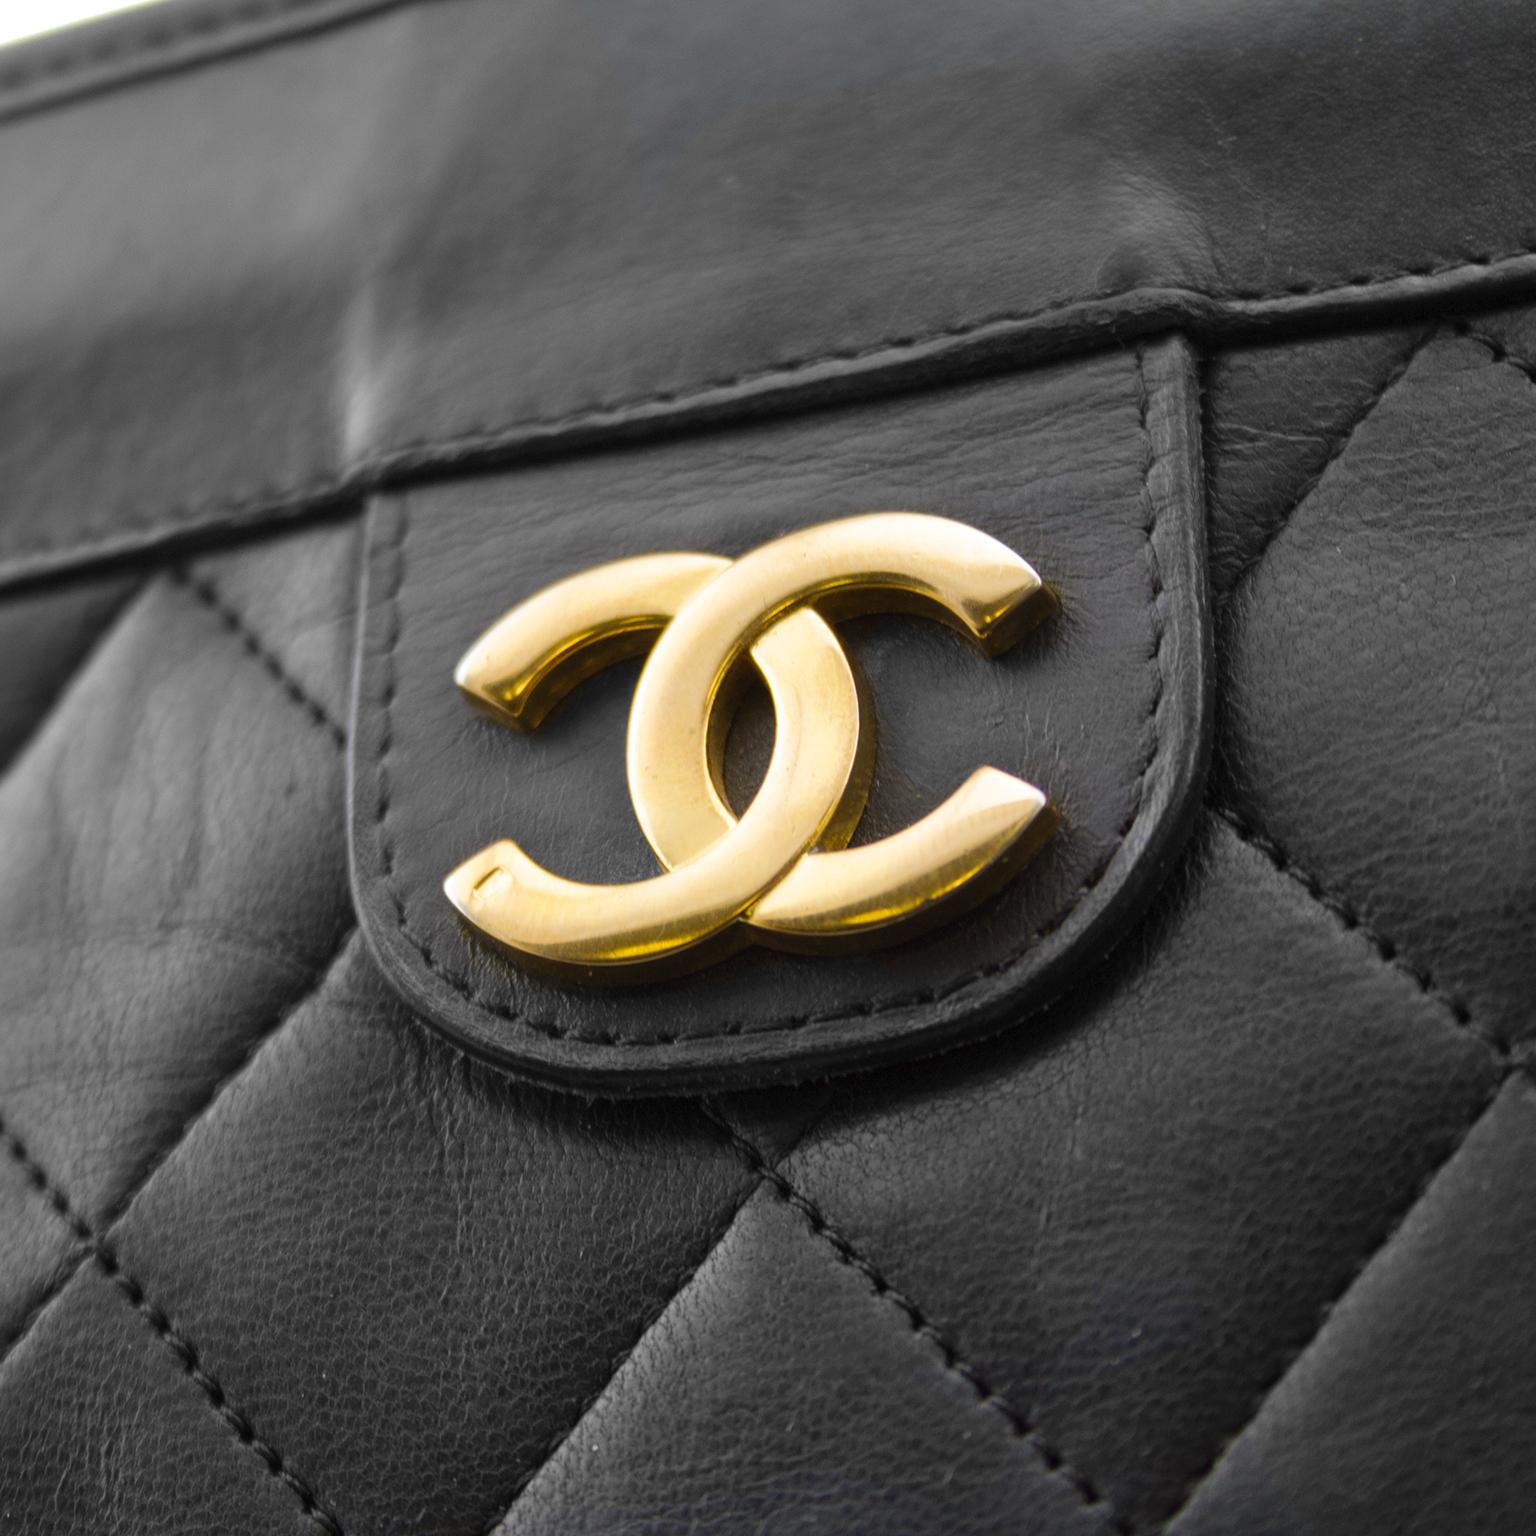 Women's or Men's Chanel Black Quilted Lambskin Leather Portfolio Clutch Bag